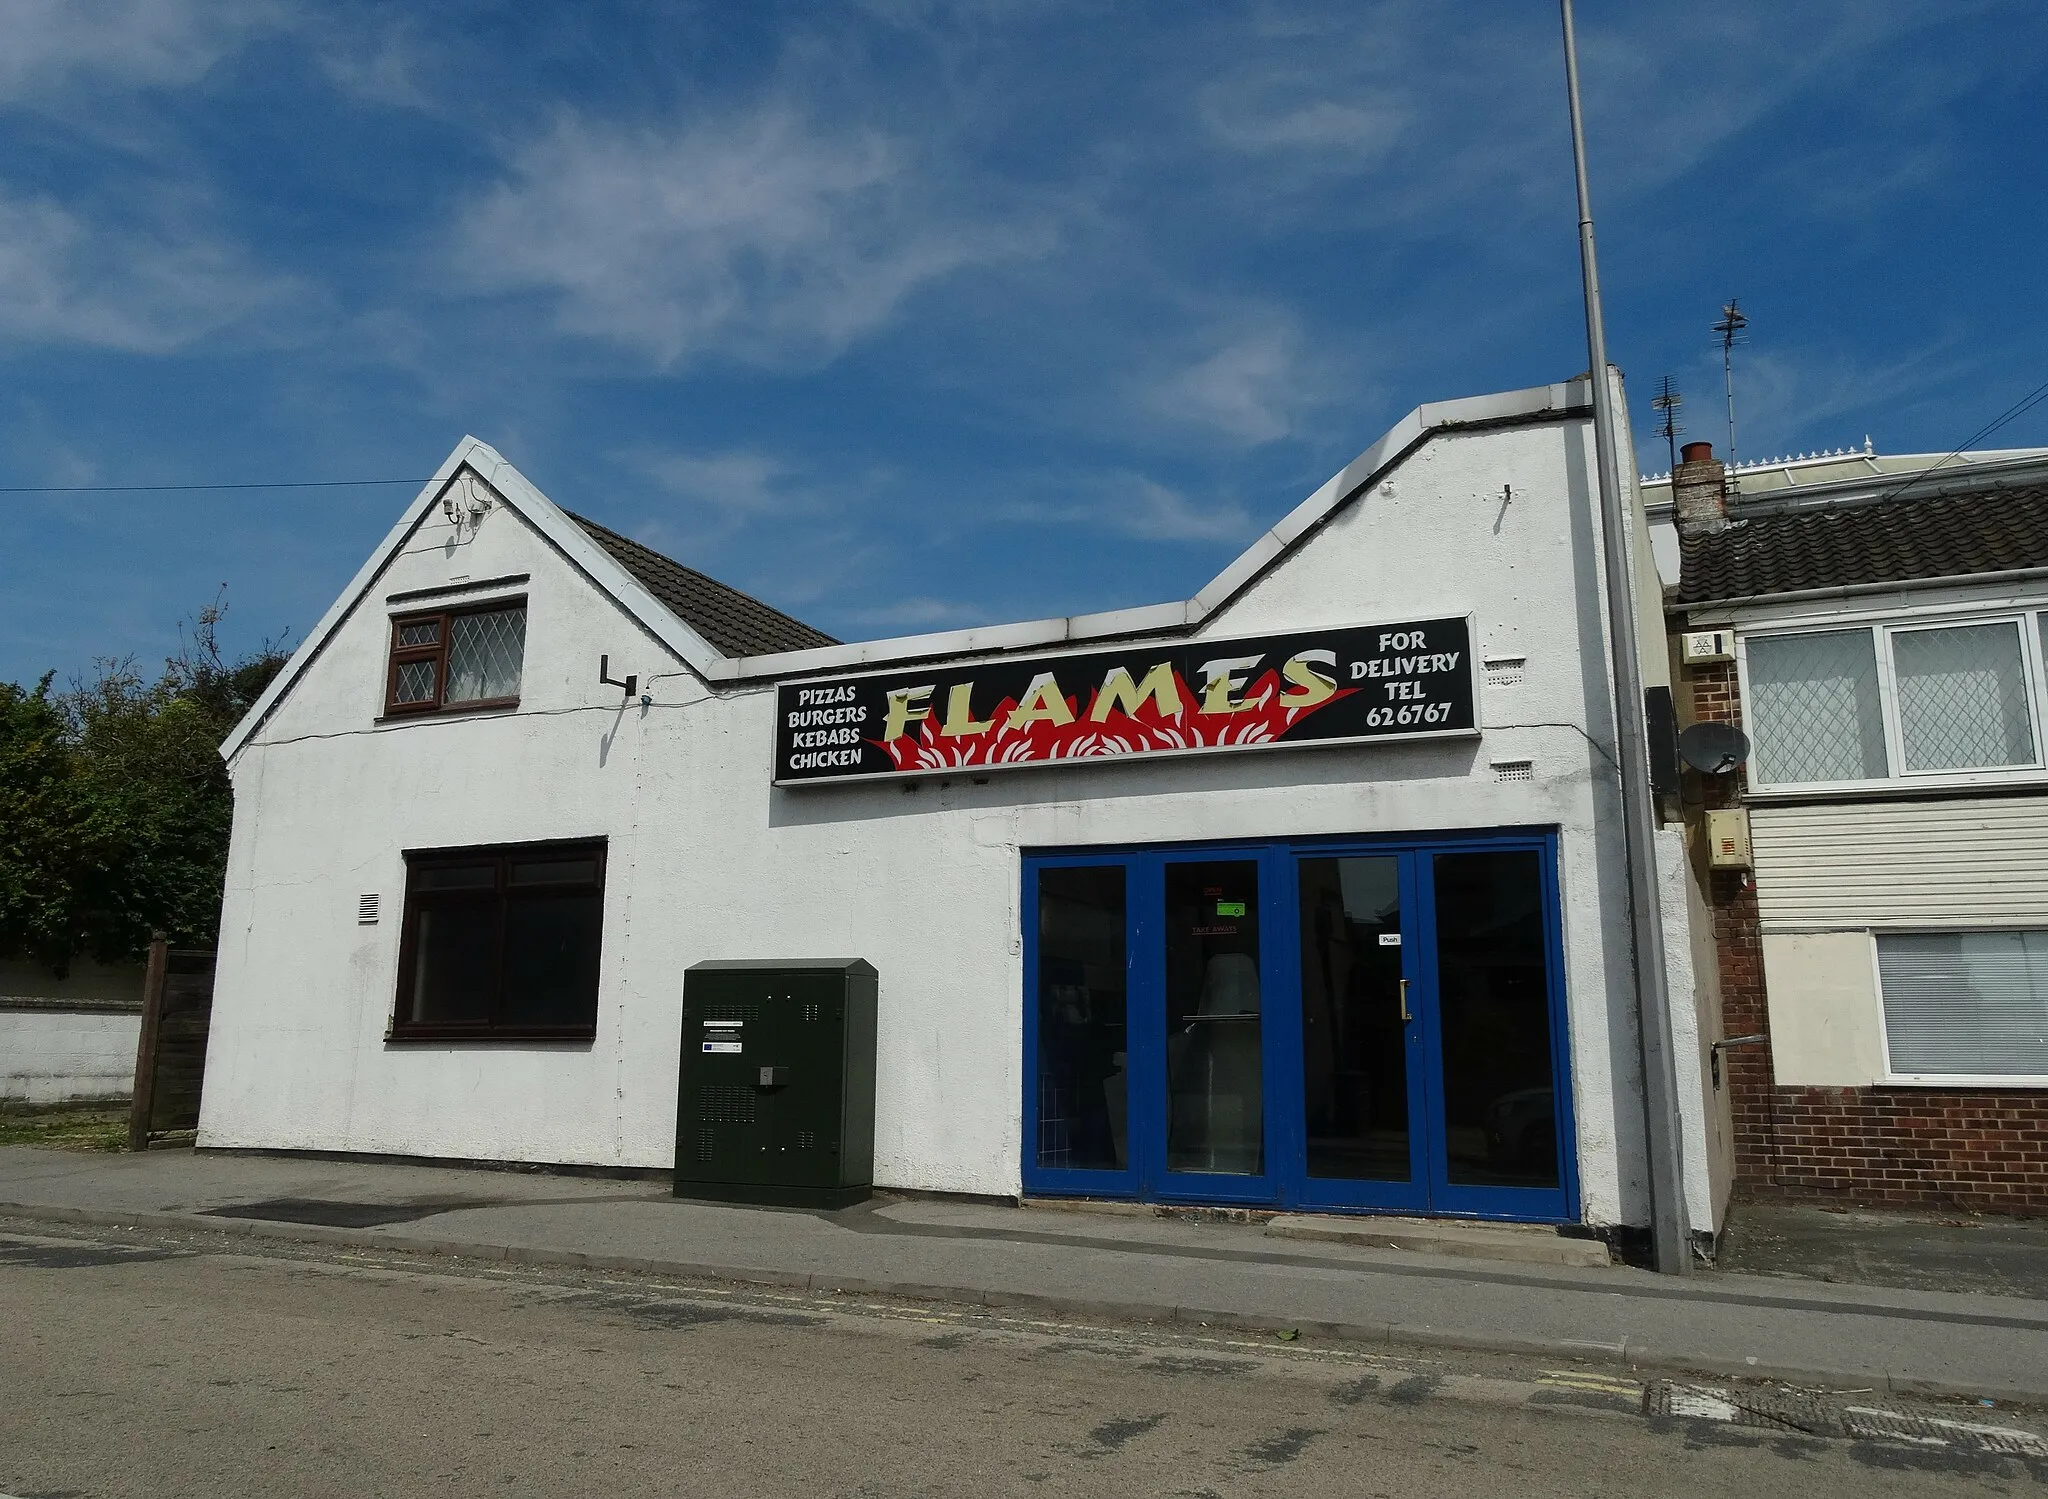 Photo showing: "Flames" takeaway business in Keyingham